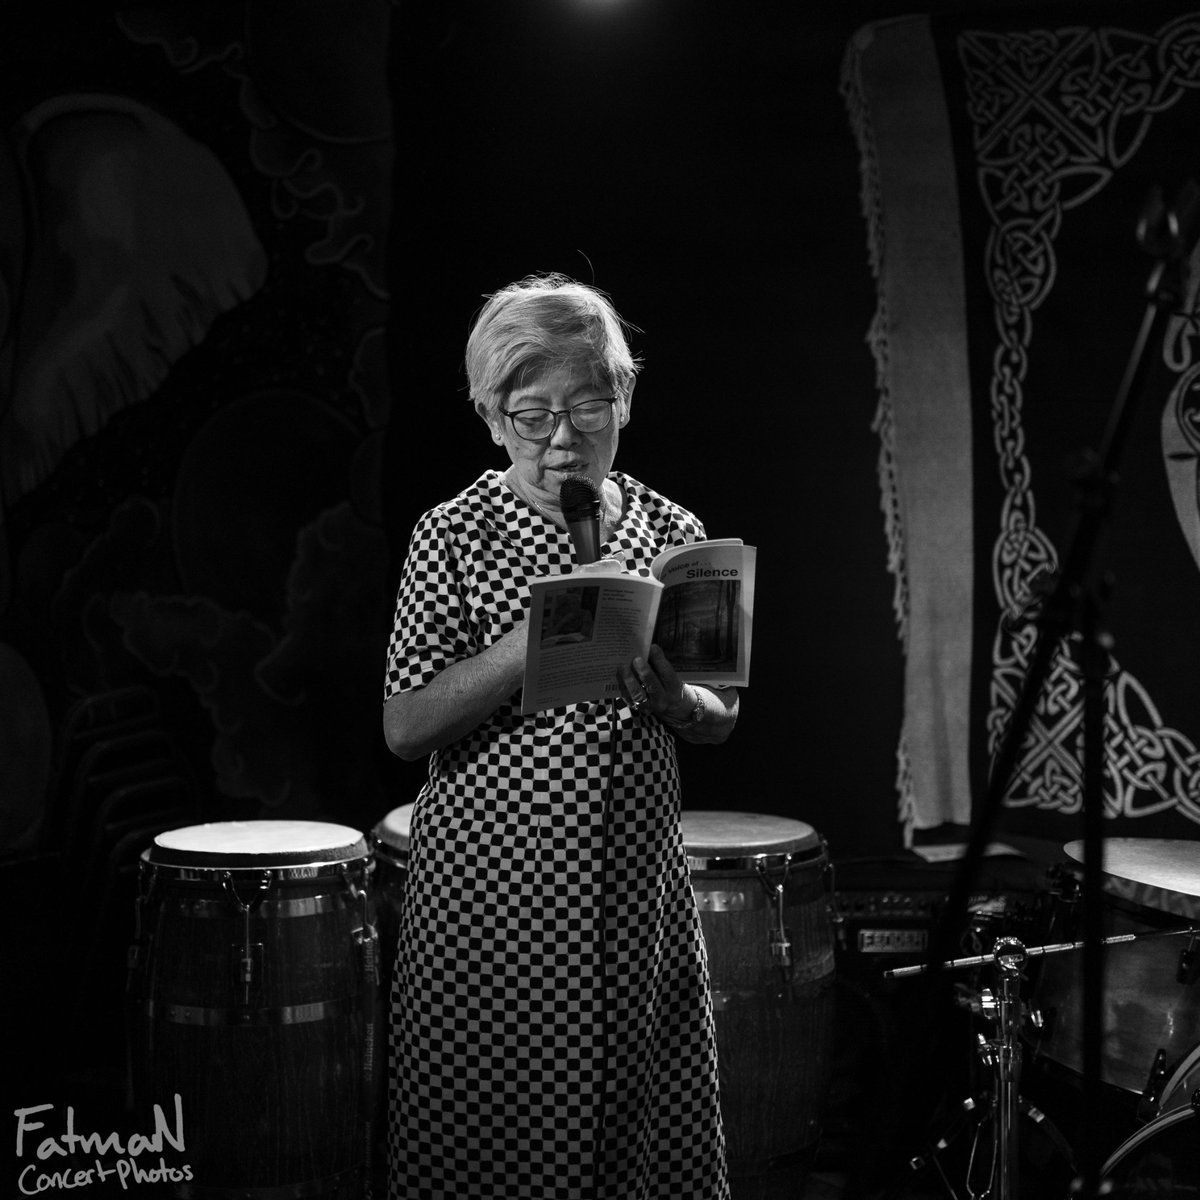 Black and white photo of an older woman with glasses and checkered dress standing on stage reading